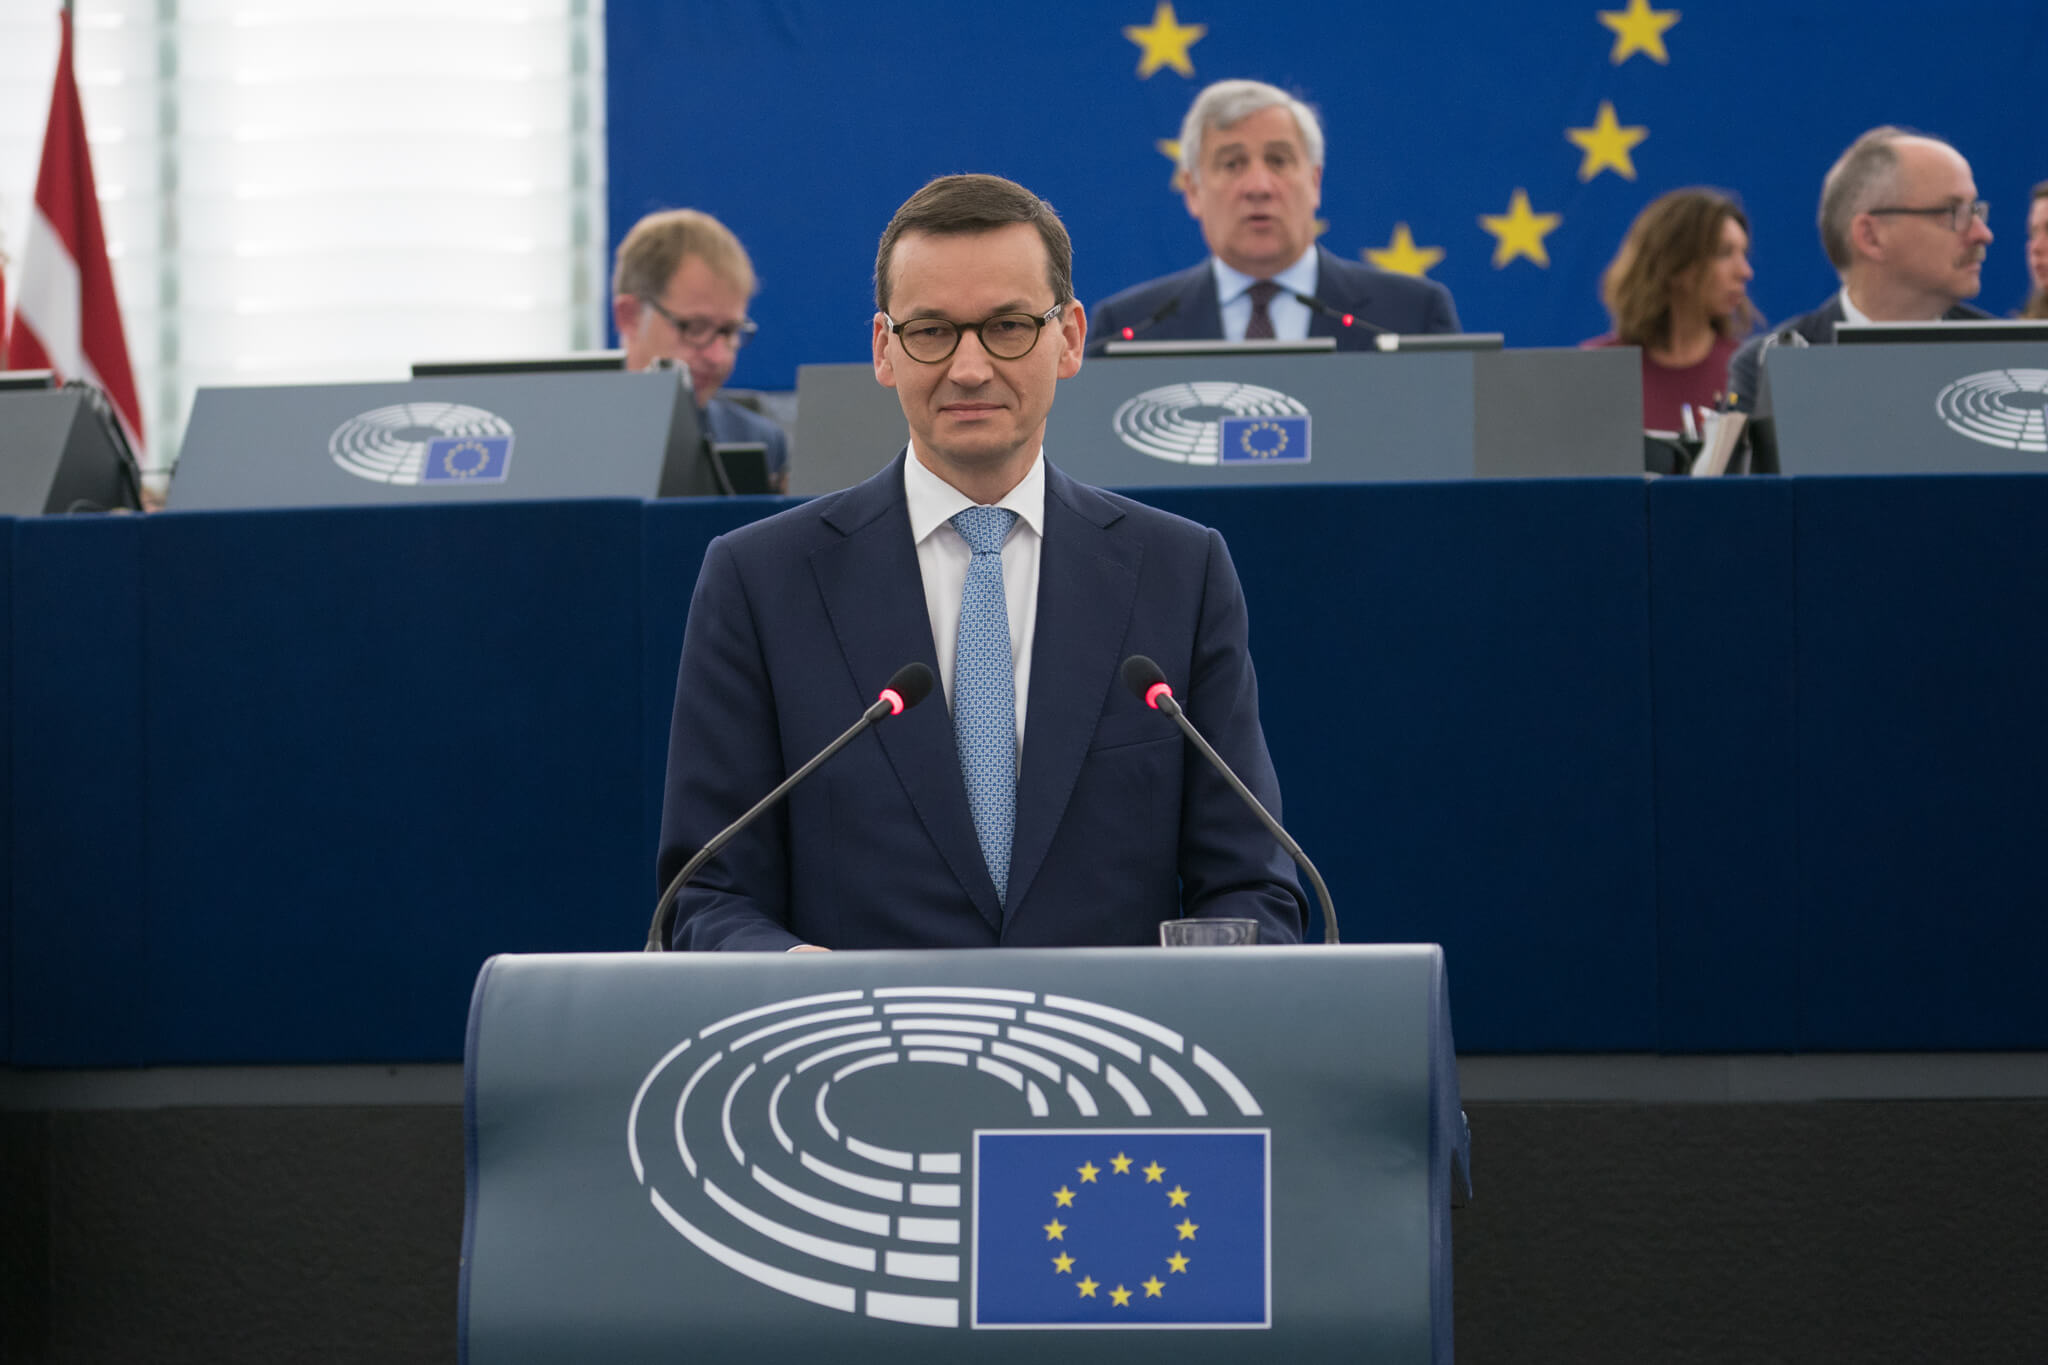 Prime Minister of Poland Mateusz Morawiecki debated the future of Europe with MEPs and EU Commission Vice-President Valdis Dombrovskis in 2018. European Parliament 